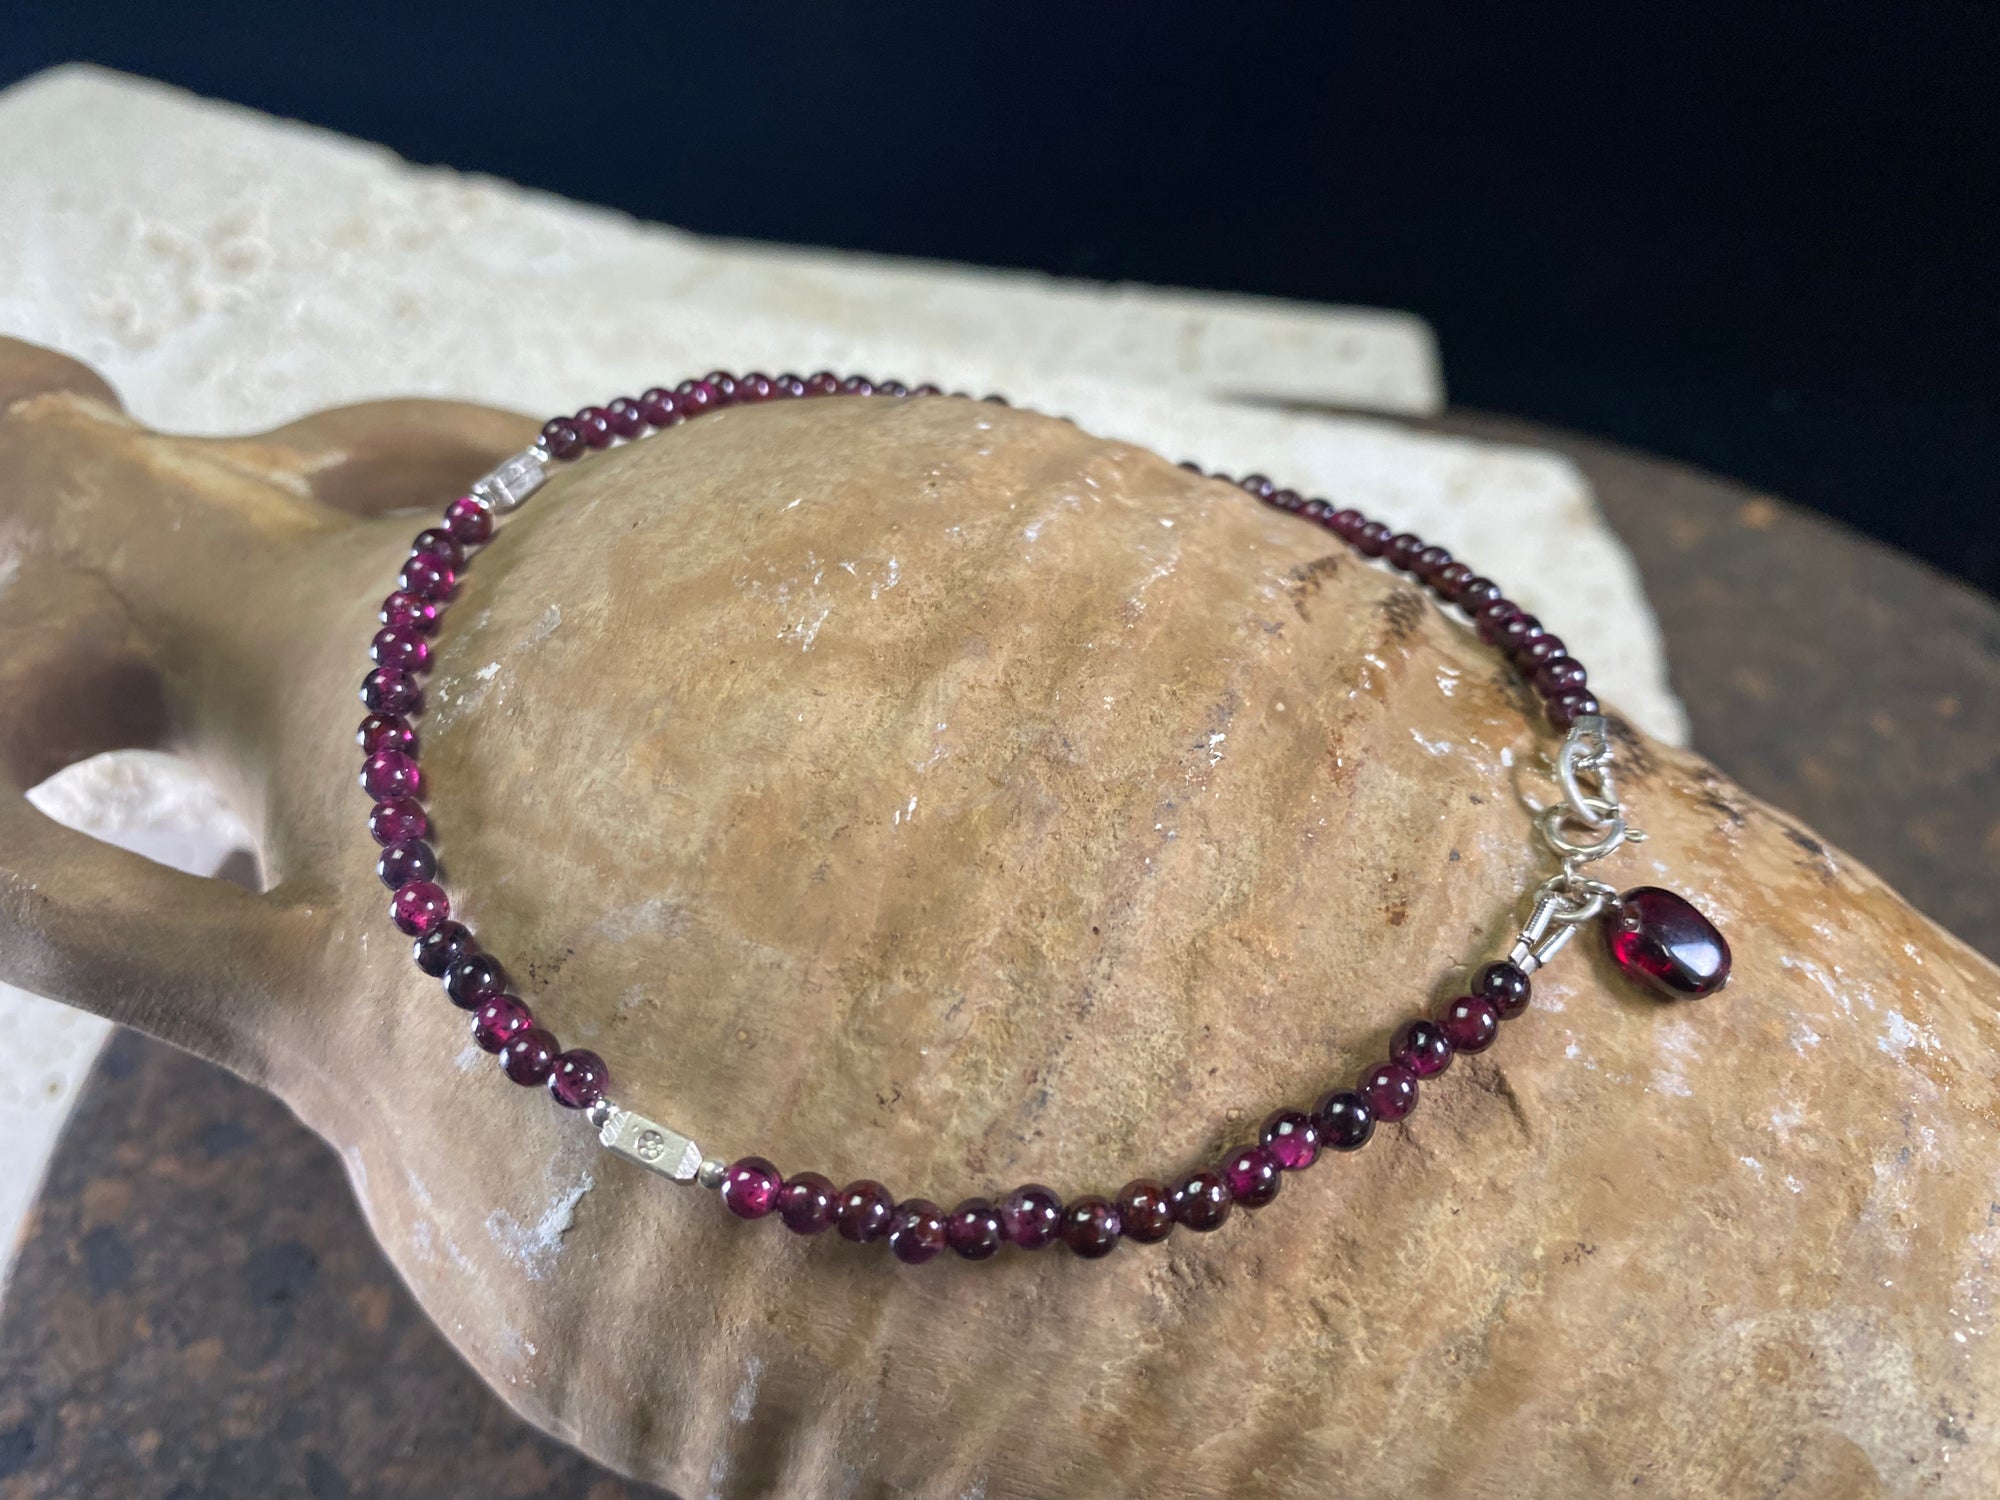 Gypsy anklets featuring natural garnet and sterling silver charms. Sterling silver clasps and detailing, with a garnet pendant that sits at the back of the anklet. Designed to sit gracefully around the foot rather than tight to the ankle. Select from three sizes